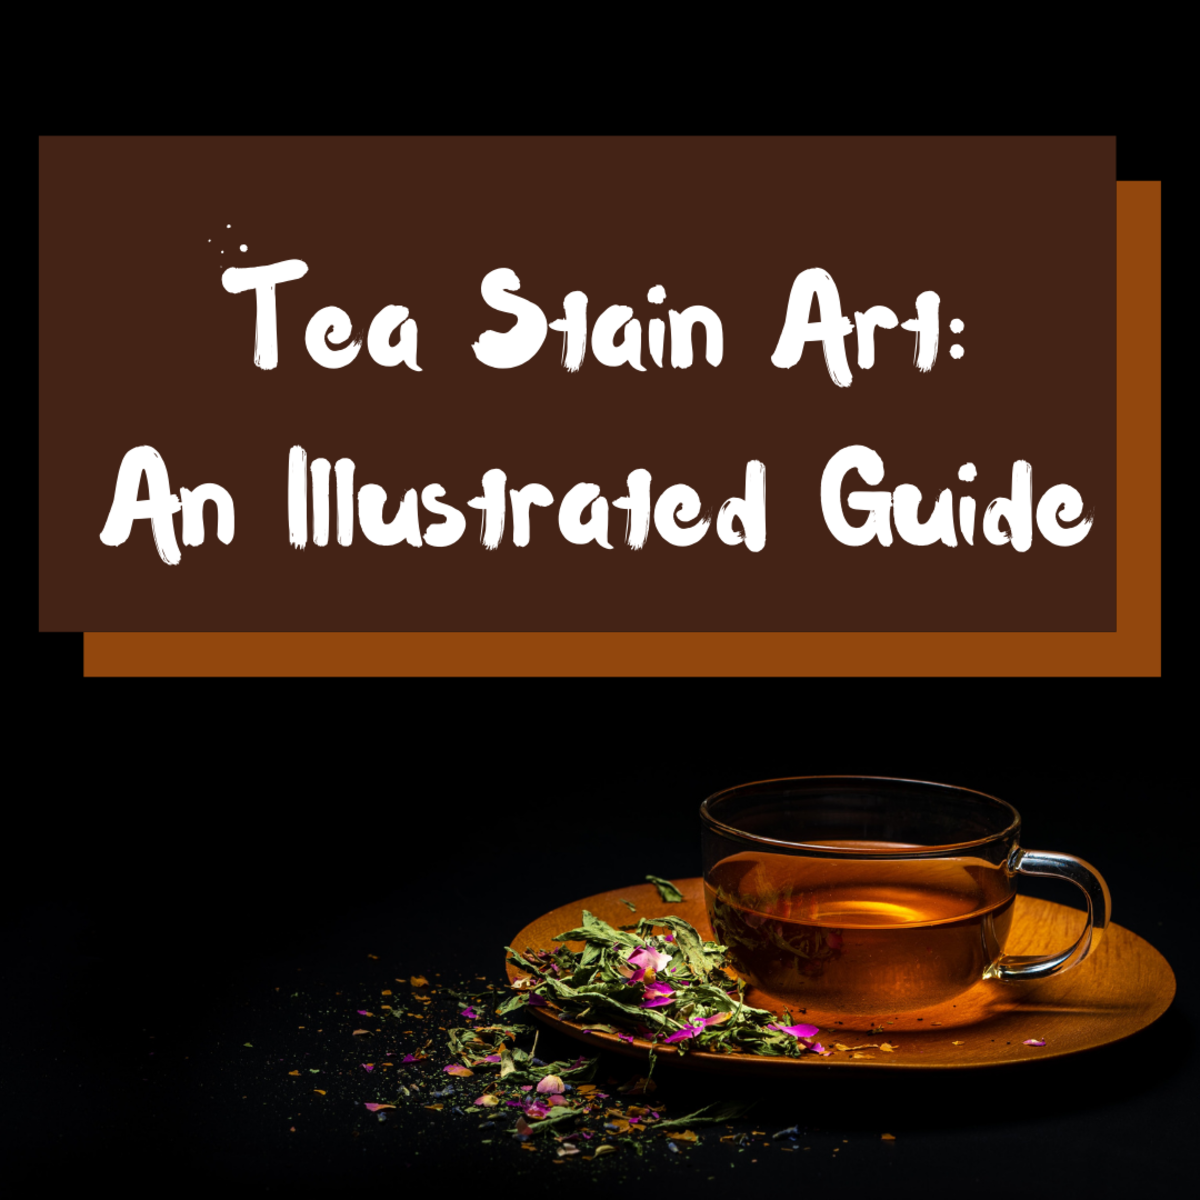 Learn how to create art from tea stains on paper. This article guides you through the process and offers creative ideas.